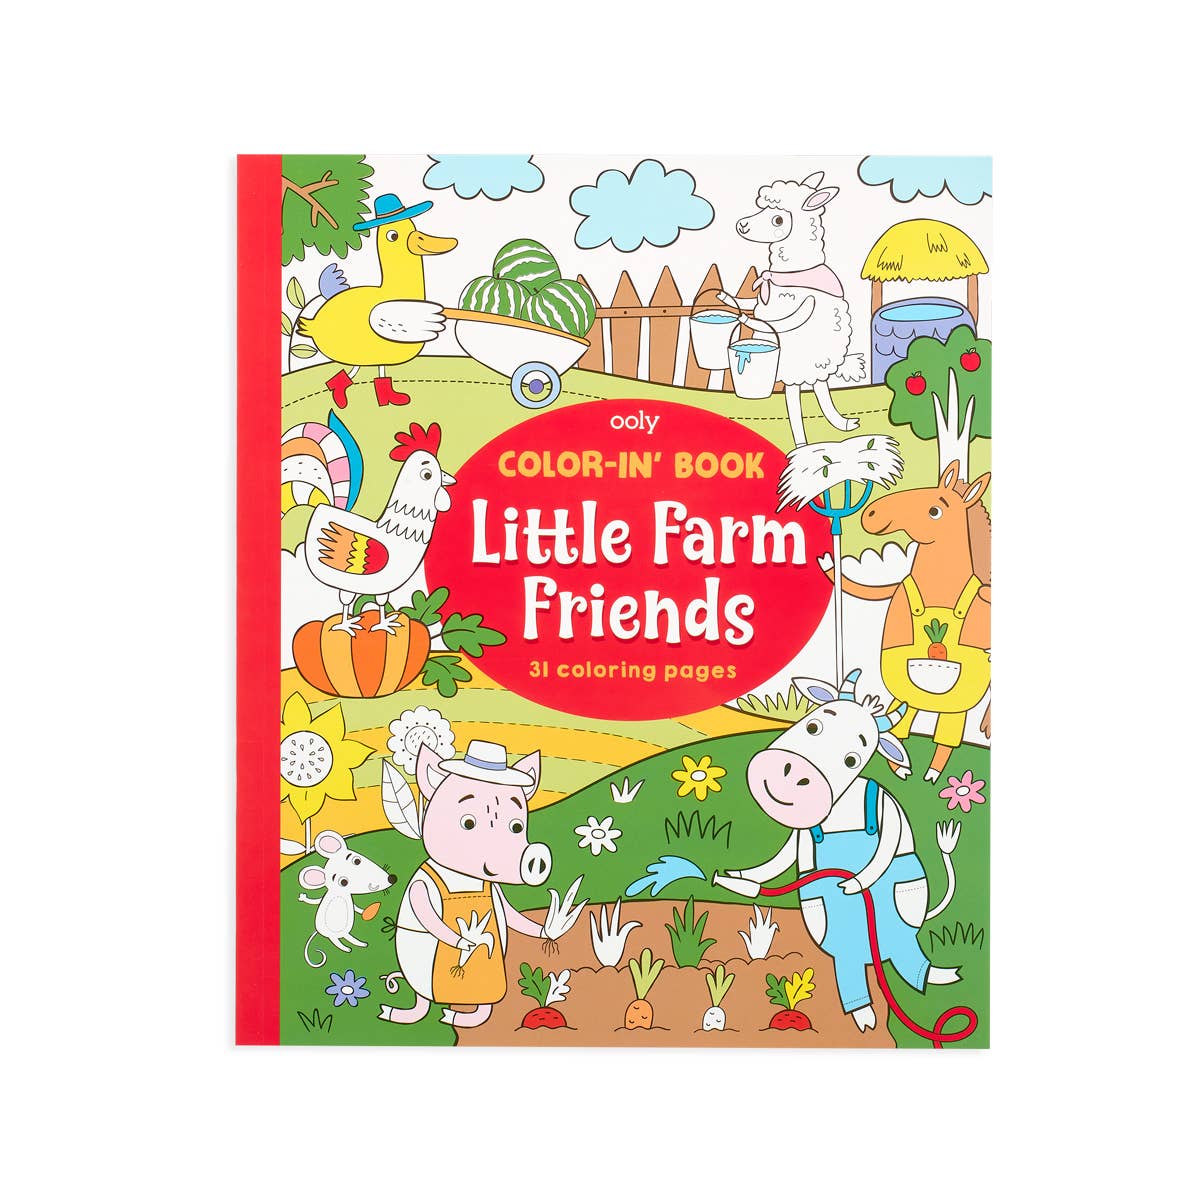 OOLY - Color-in' Book: Little Farm Friends